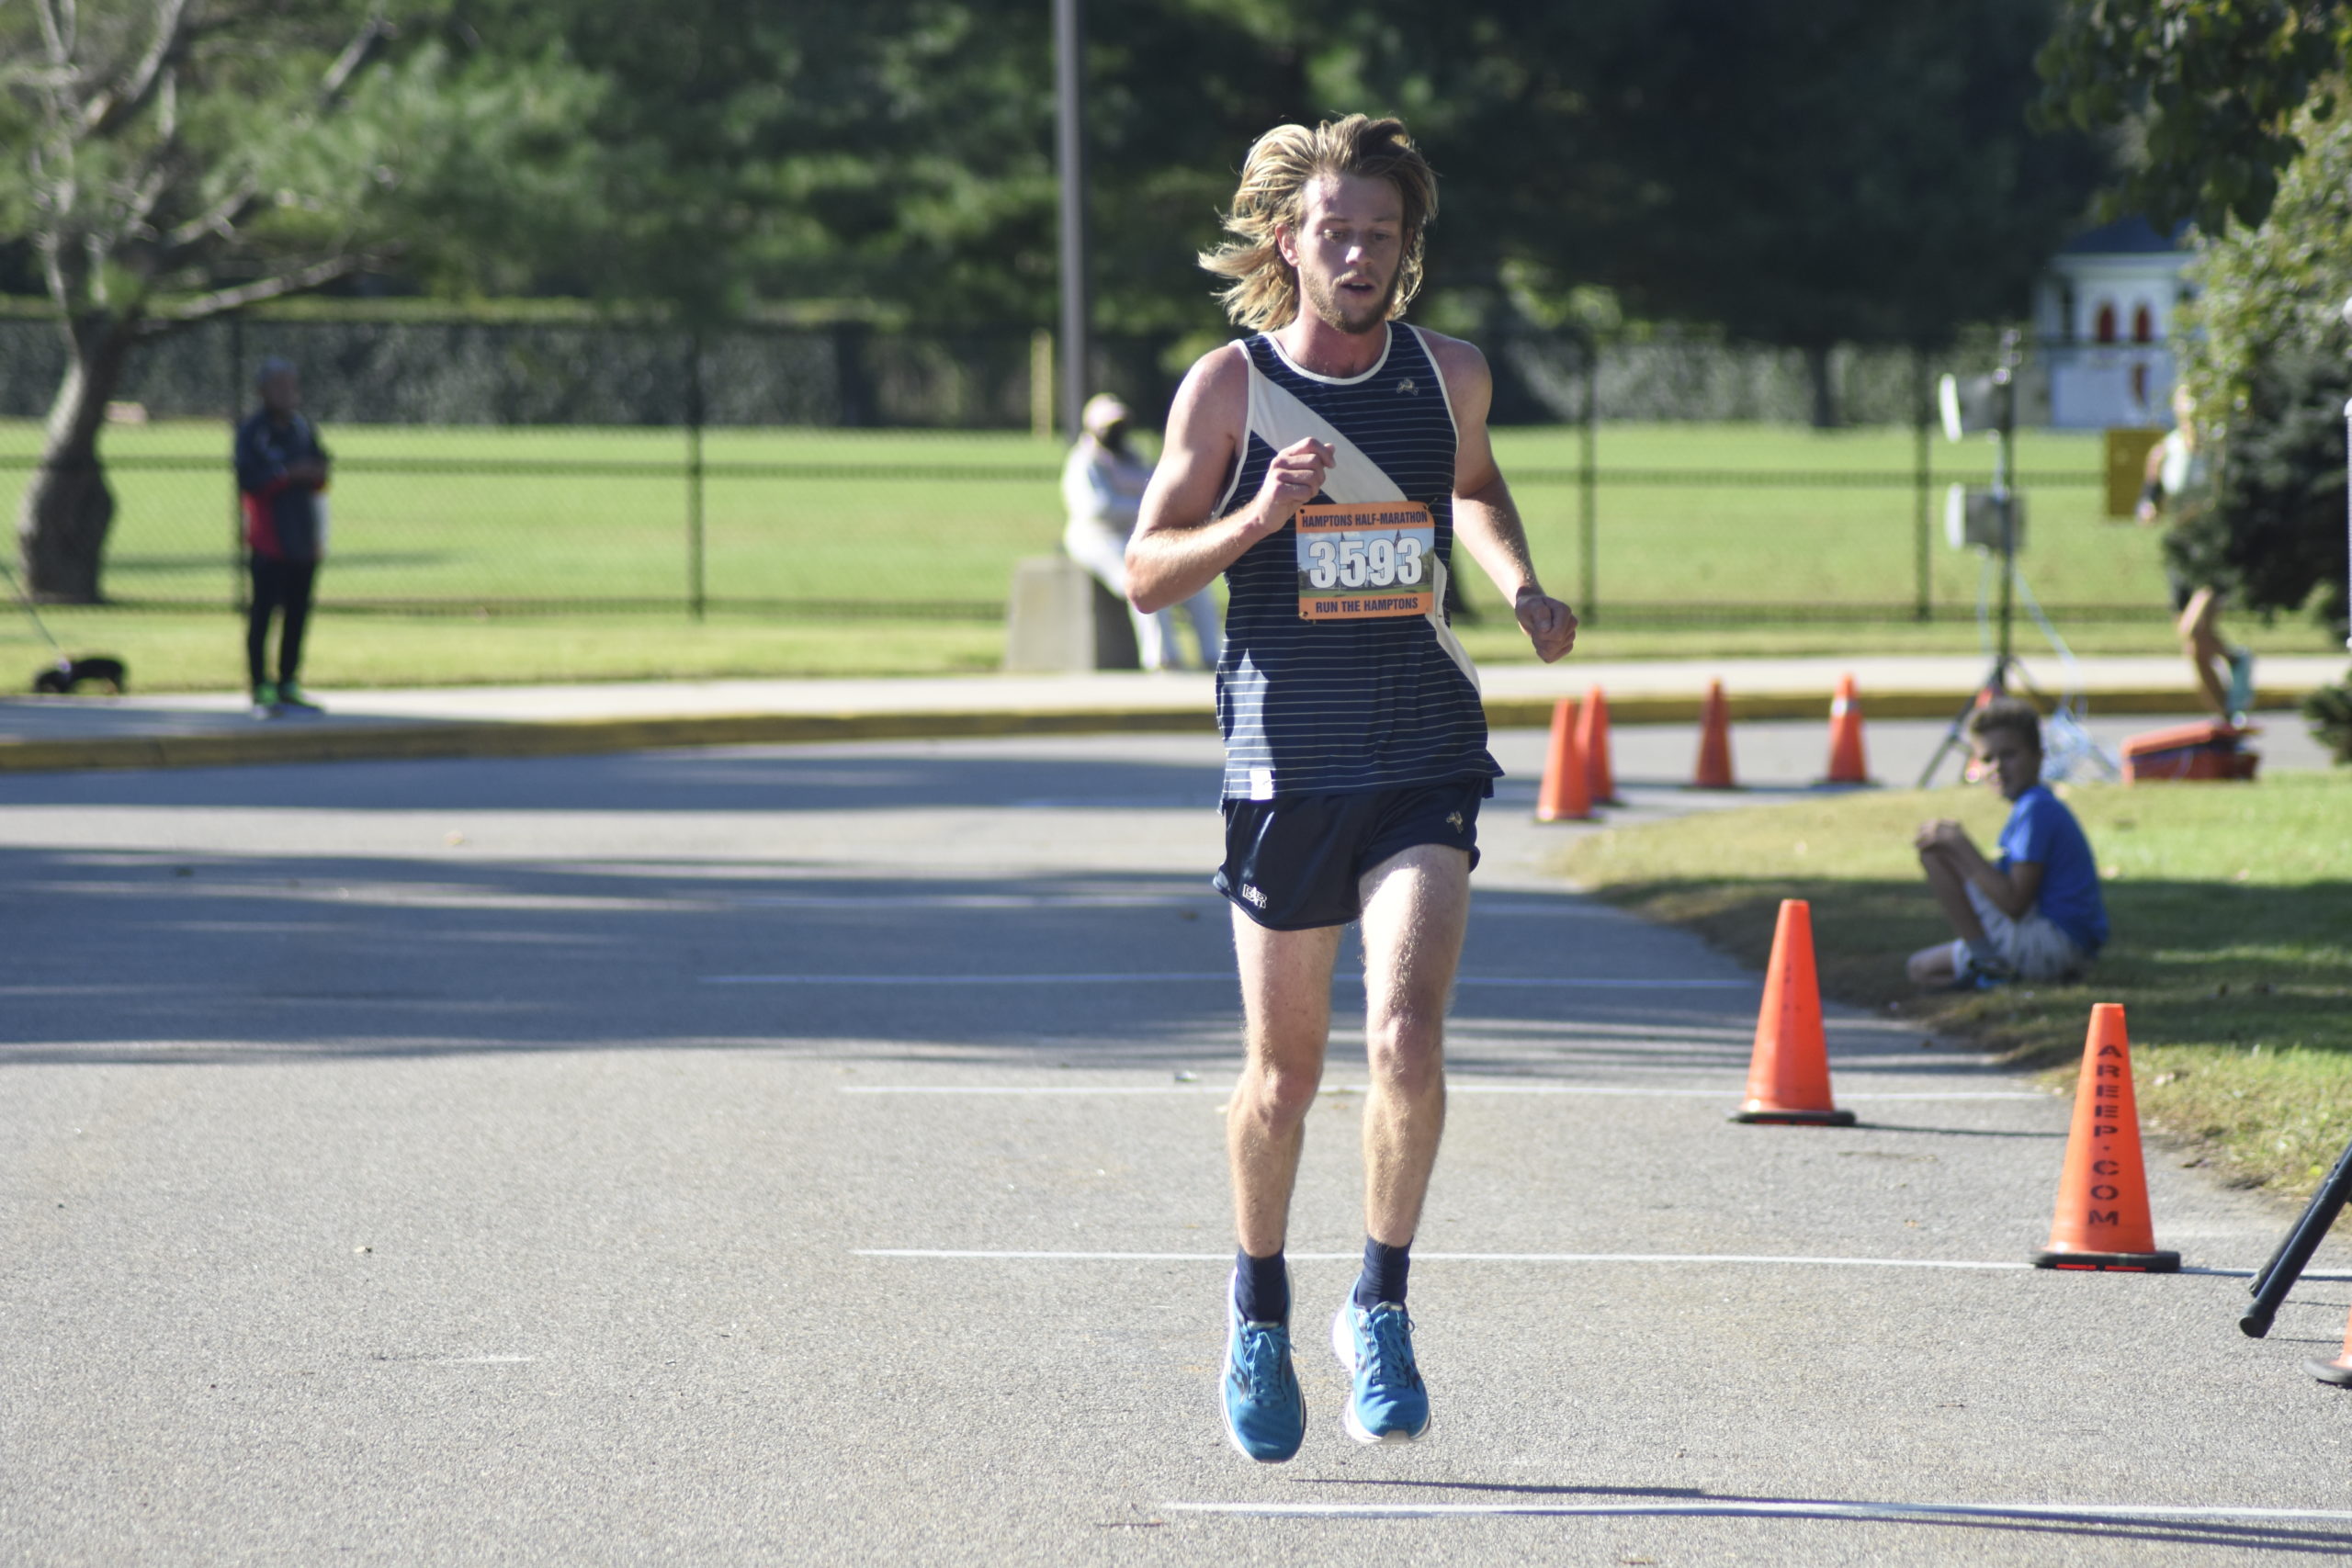 Erik Engstrom of East Hampton placed second overall in the Hamptons Half Marathon.